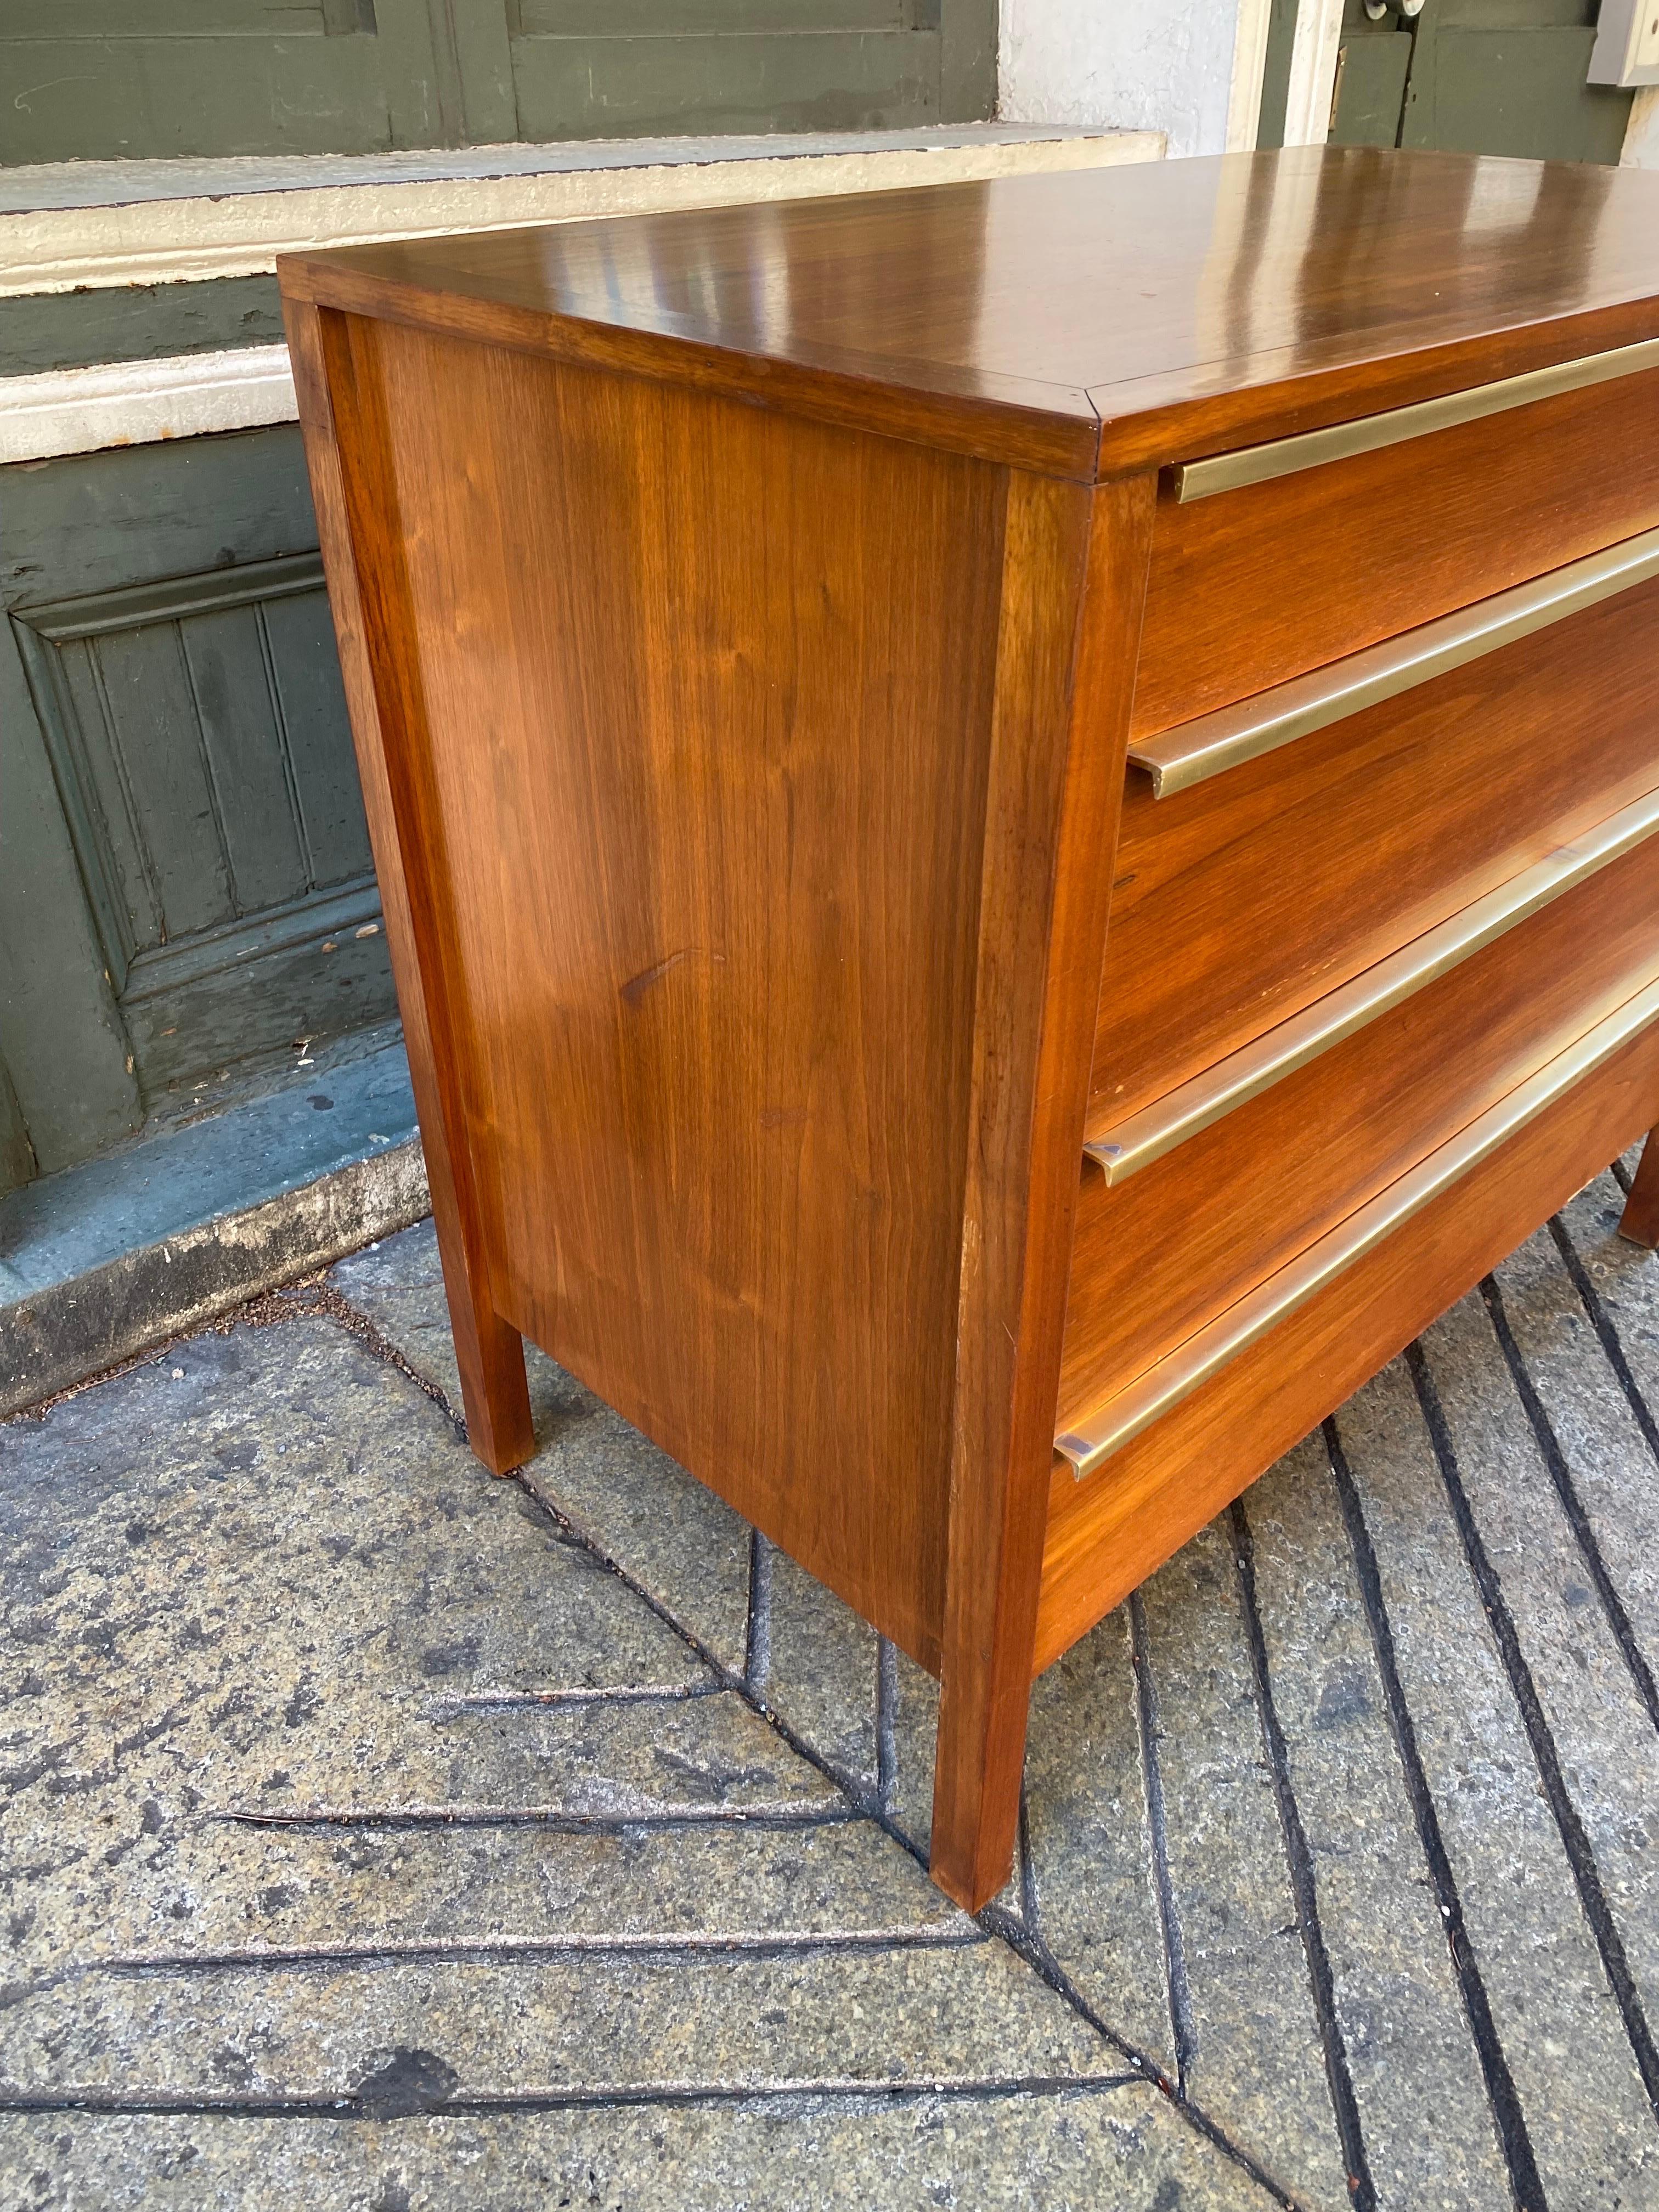 William Pahlmann 4 drawer dresser for Hastings Furniture. Additionally tall dresser, pair of night tables, buffet, server and table and chairs all from a recently acquired Estate. All being sold in Original Clean Condition! Every Drawer has an